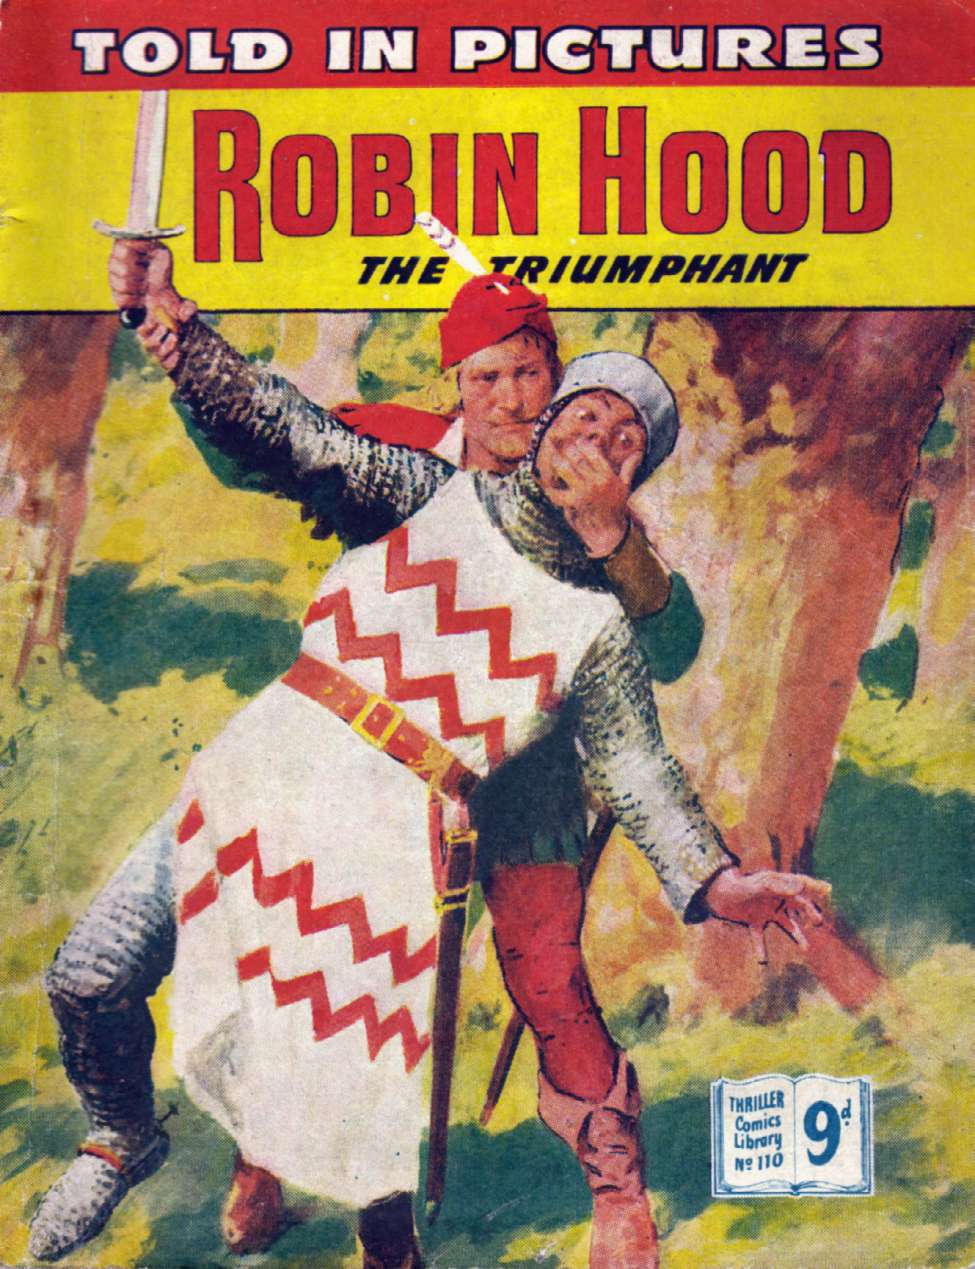 Book Cover For Thriller Comics Library 110 - Robin Hood The Triumphant